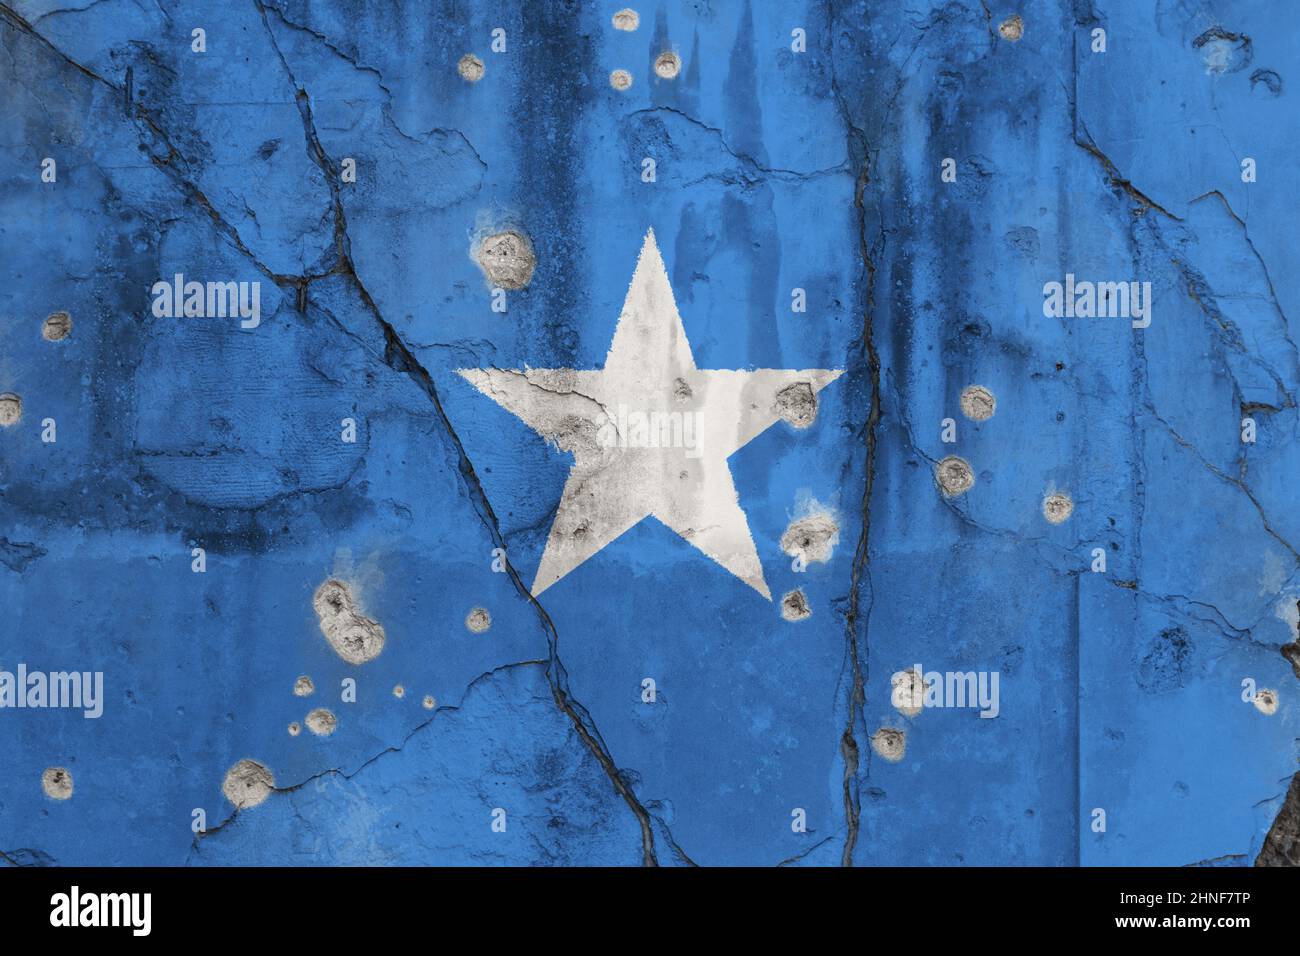 Full frame photo of a weathered flag of Somalia painted on a cracked wall with bullet holes. Somali Civil War, conflict and crisis concept. Stock Photo